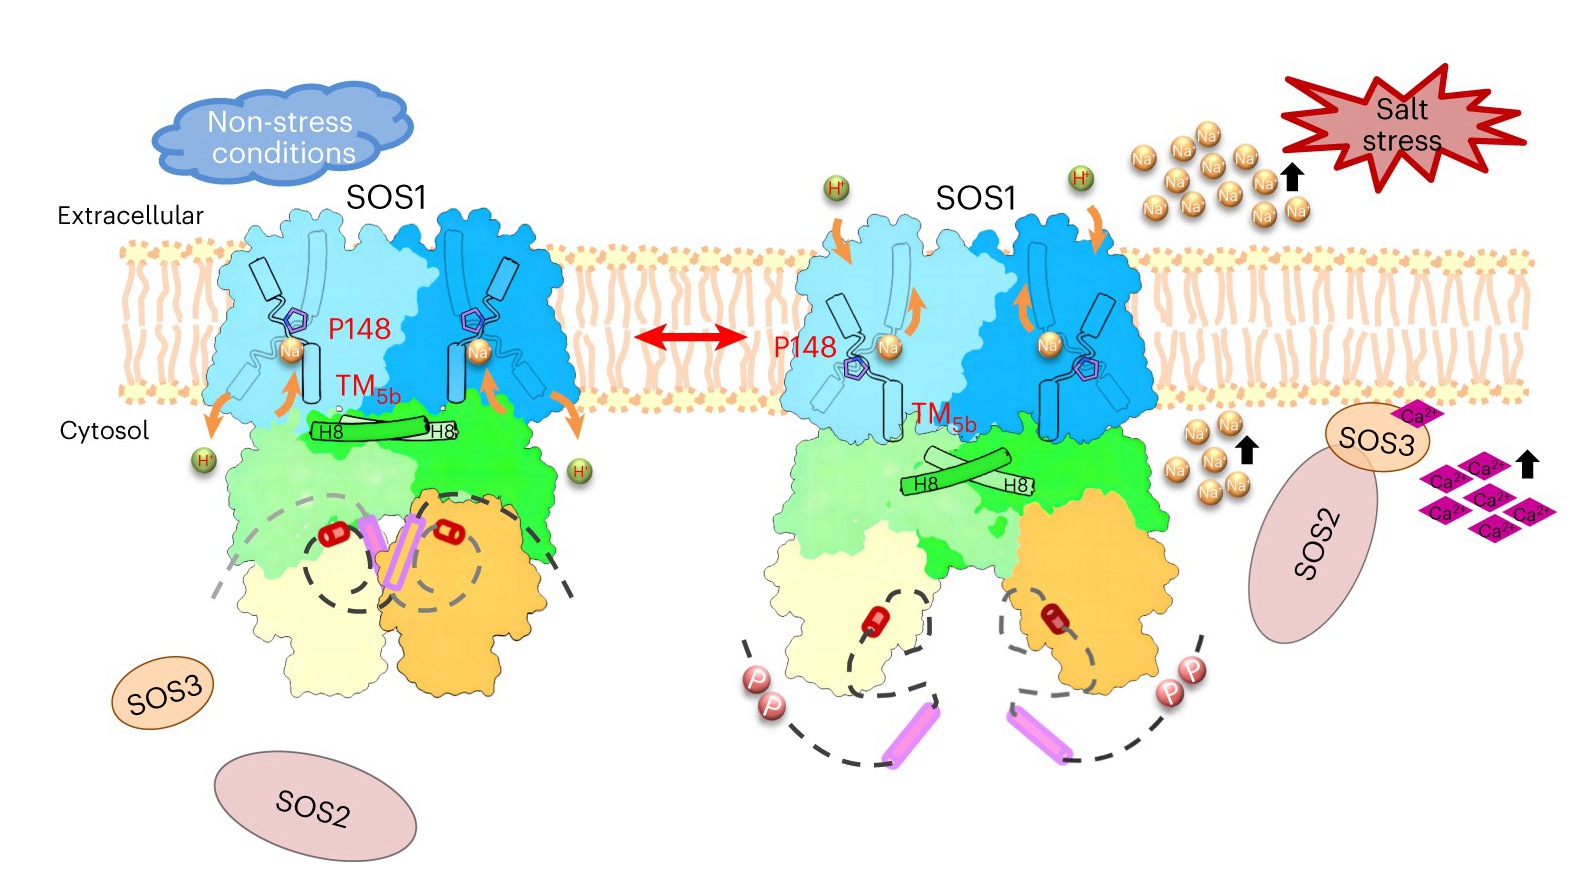 Researchers Show How SOS1 Works in Response to Salt Stress